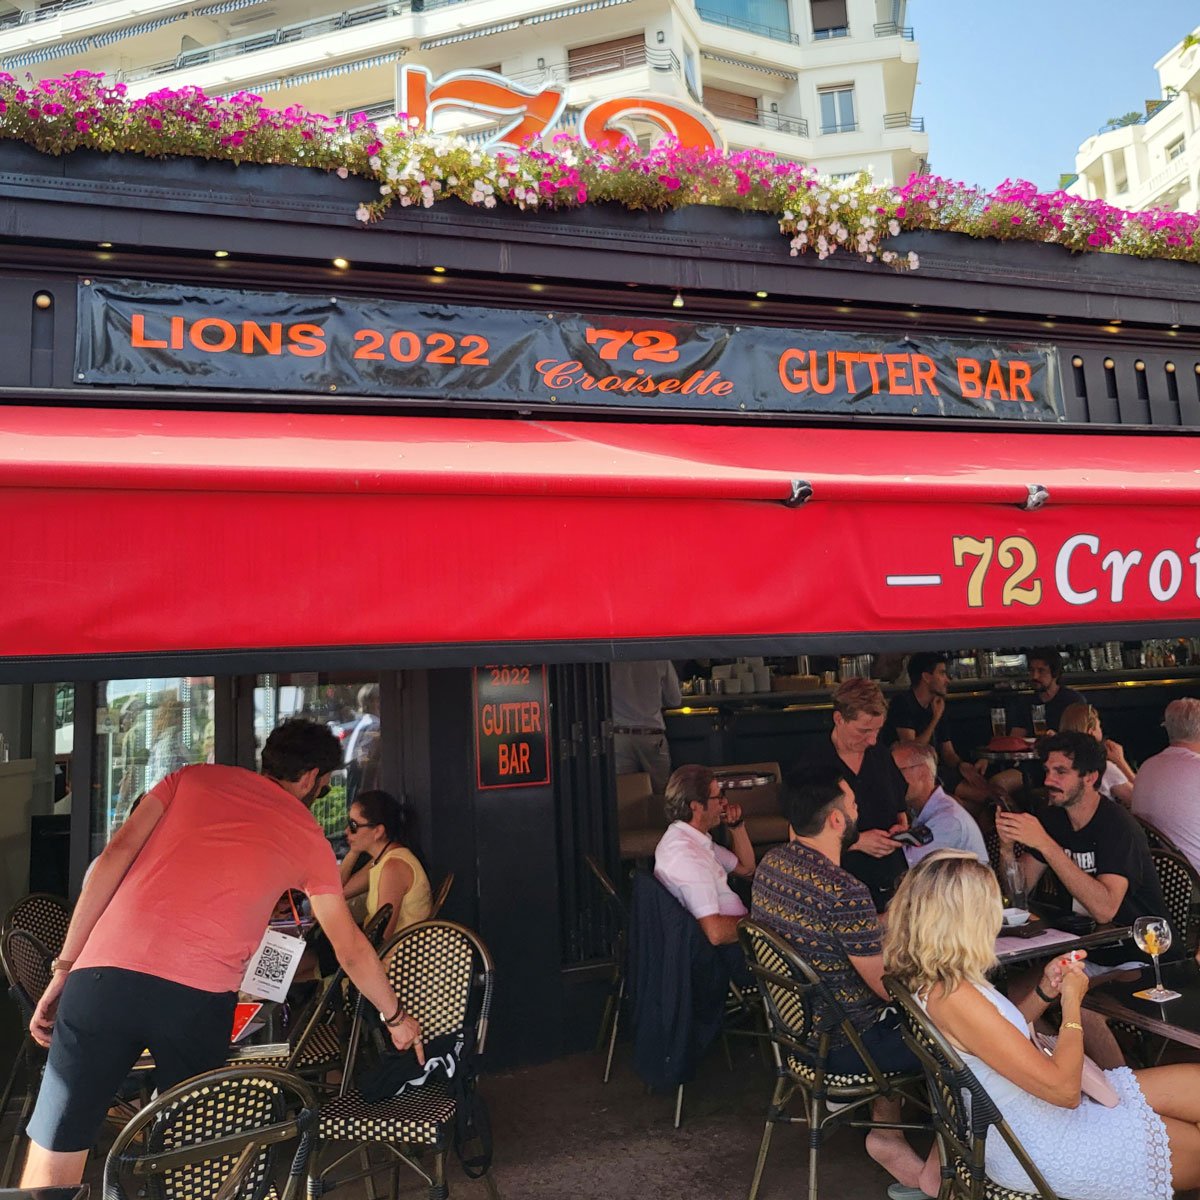 72-Croisette-Bar-Cannes-Lions-2022-Creative-by-Collective-20220620_174314.jpg